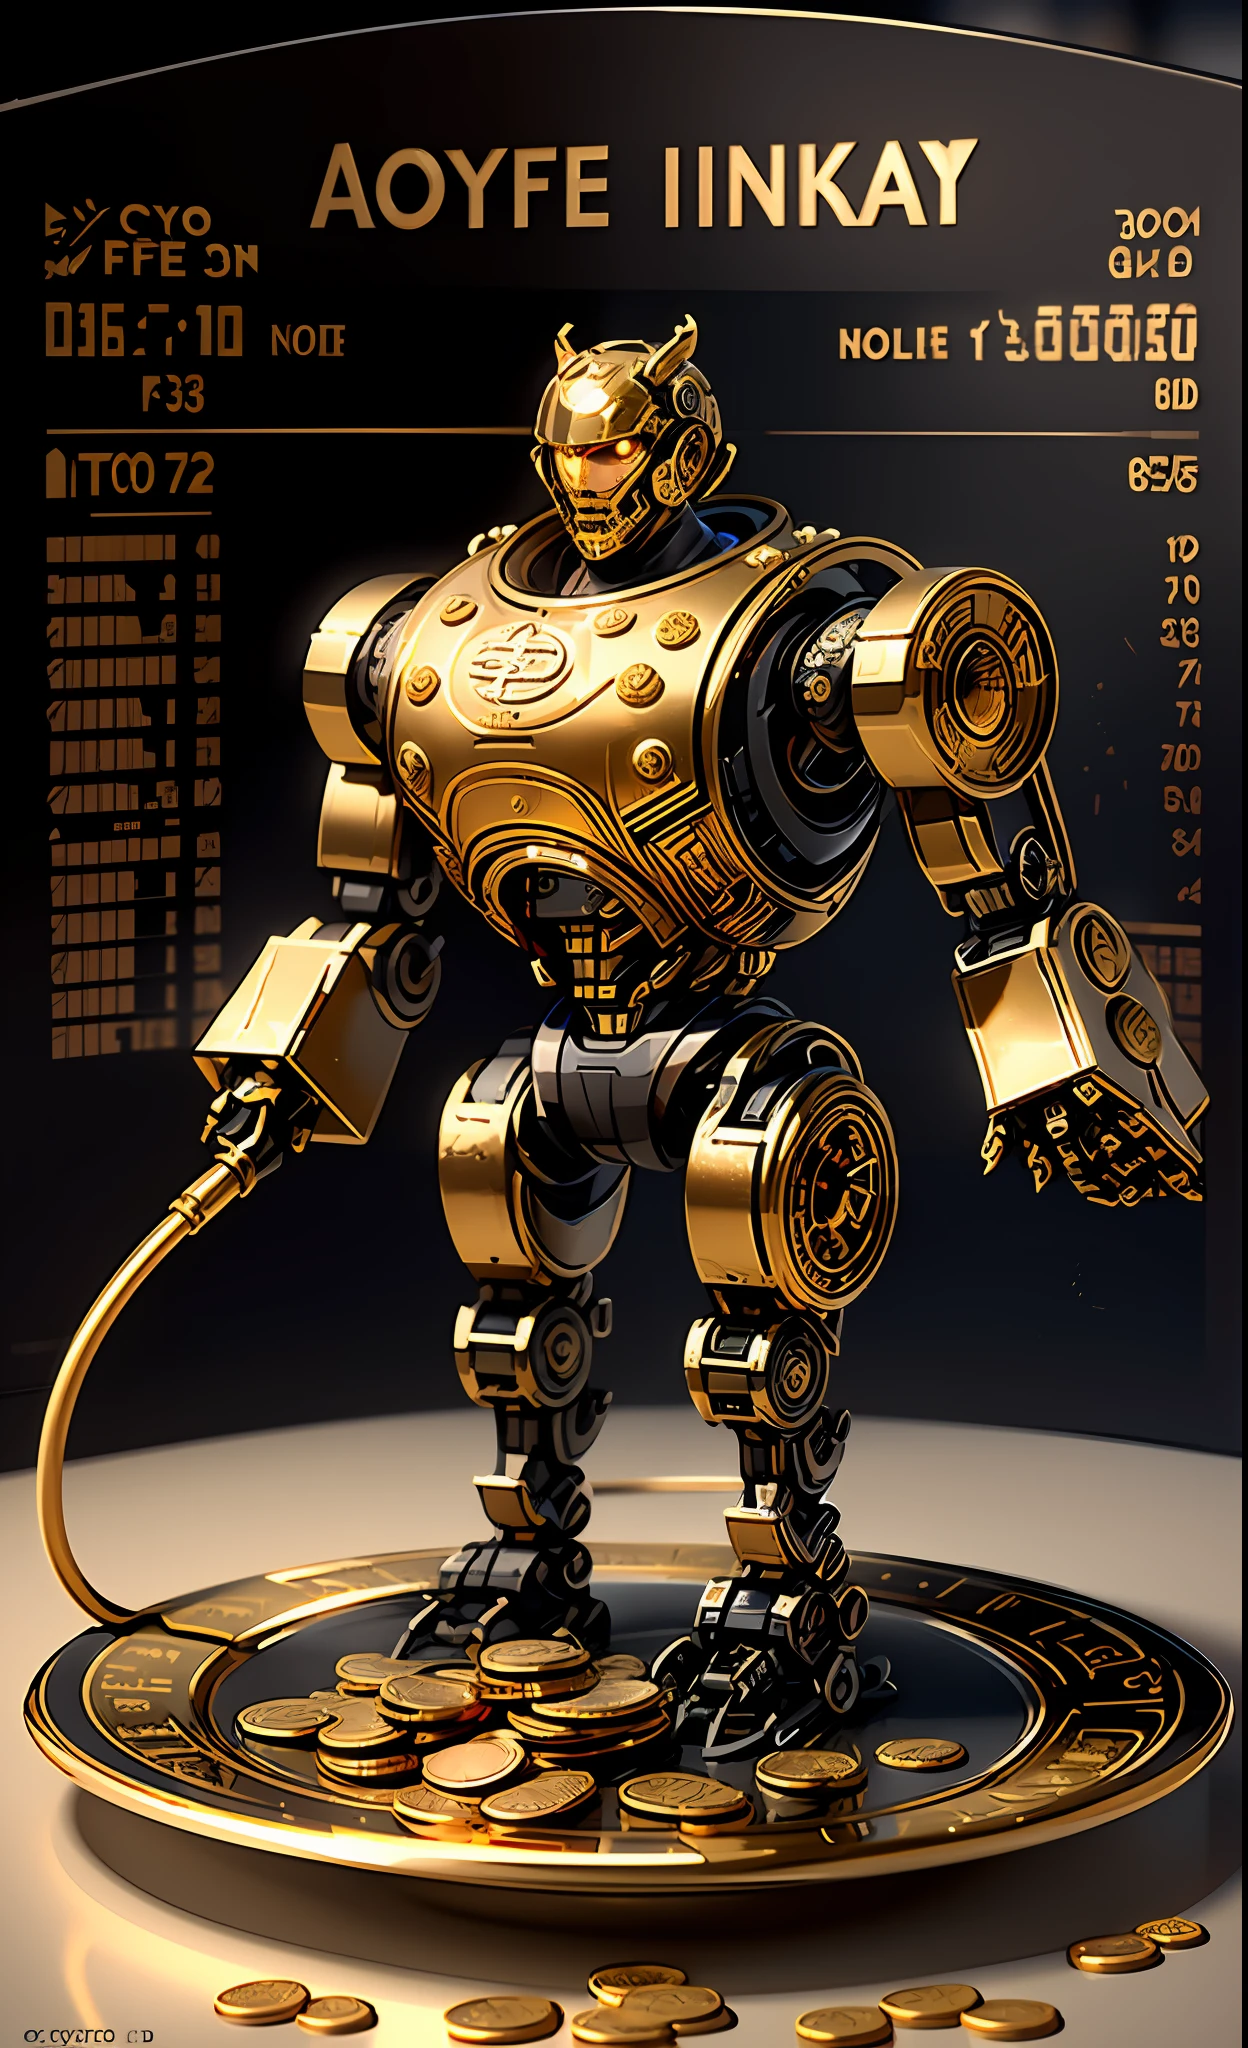 The black robot with micro hoses running gold inside them ,  Seu rosto fino com olhos luminosos azuis, holding a coffee chicara and a plate full of Bitcoin gold coins, a 3d animation in the background of the image, a big screen featuring financial market and crypto charts, investidor